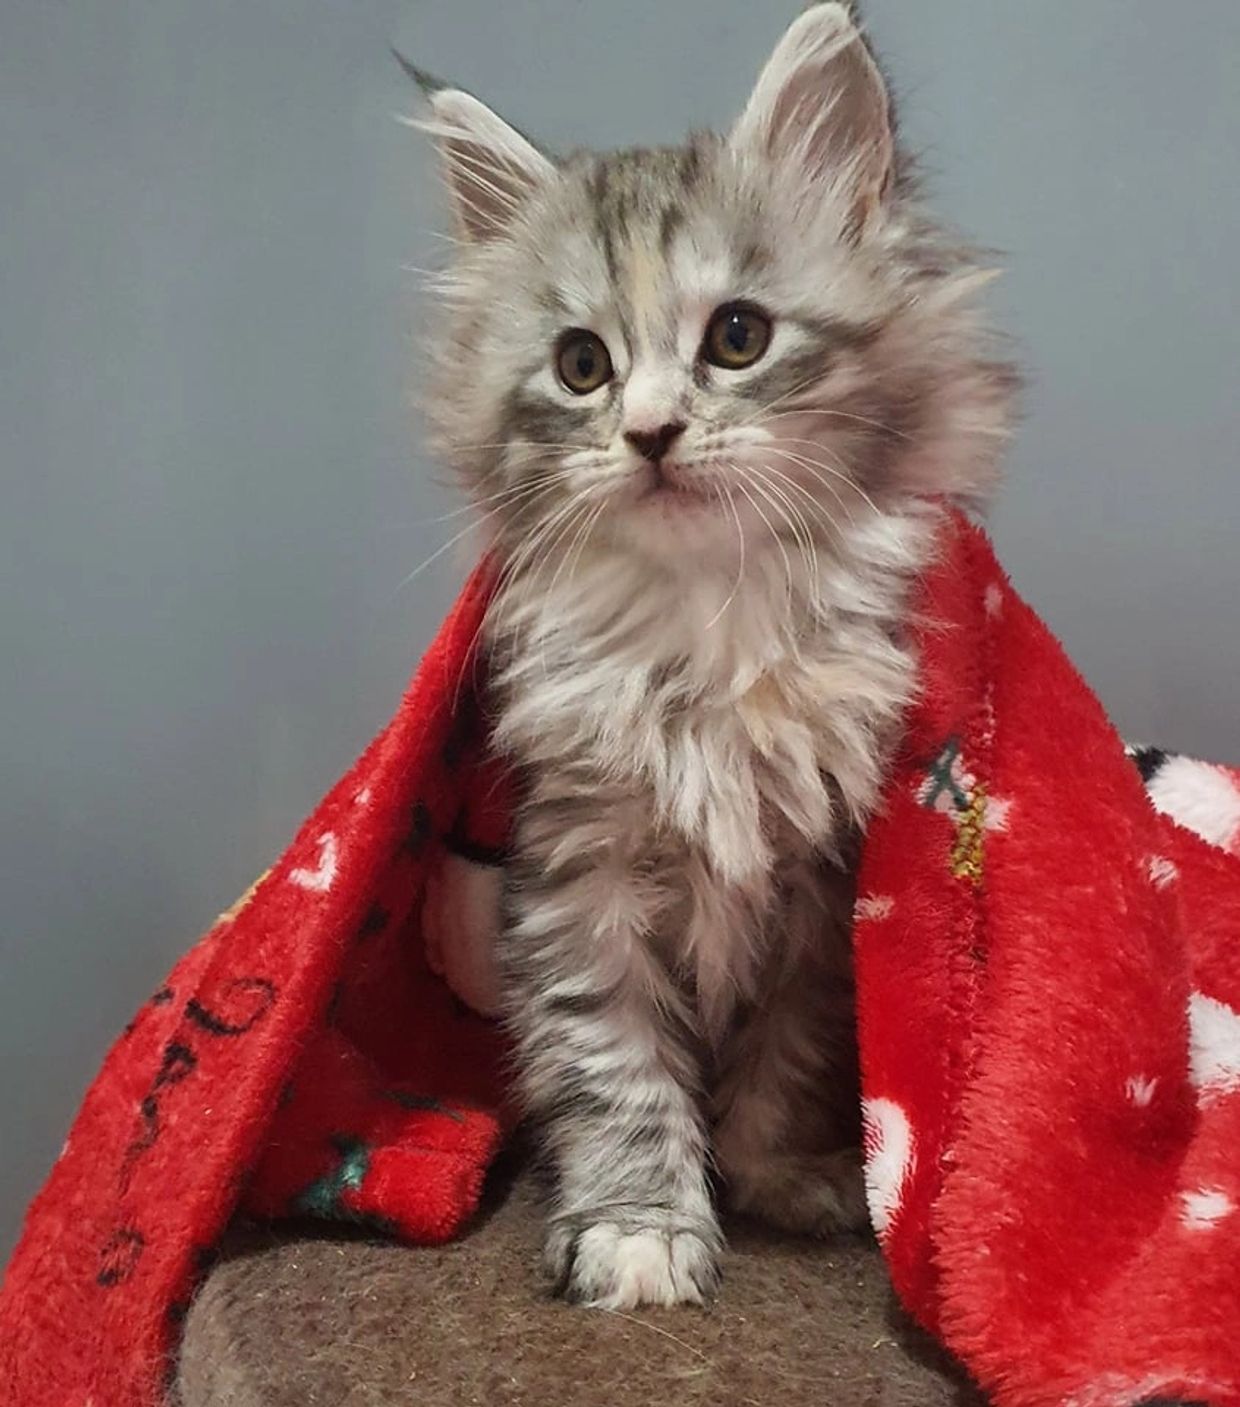 Silver Tabby Maine Coon Kitten Maine coon breeders UK Derbyshire midlands.maine coon kitten for sale